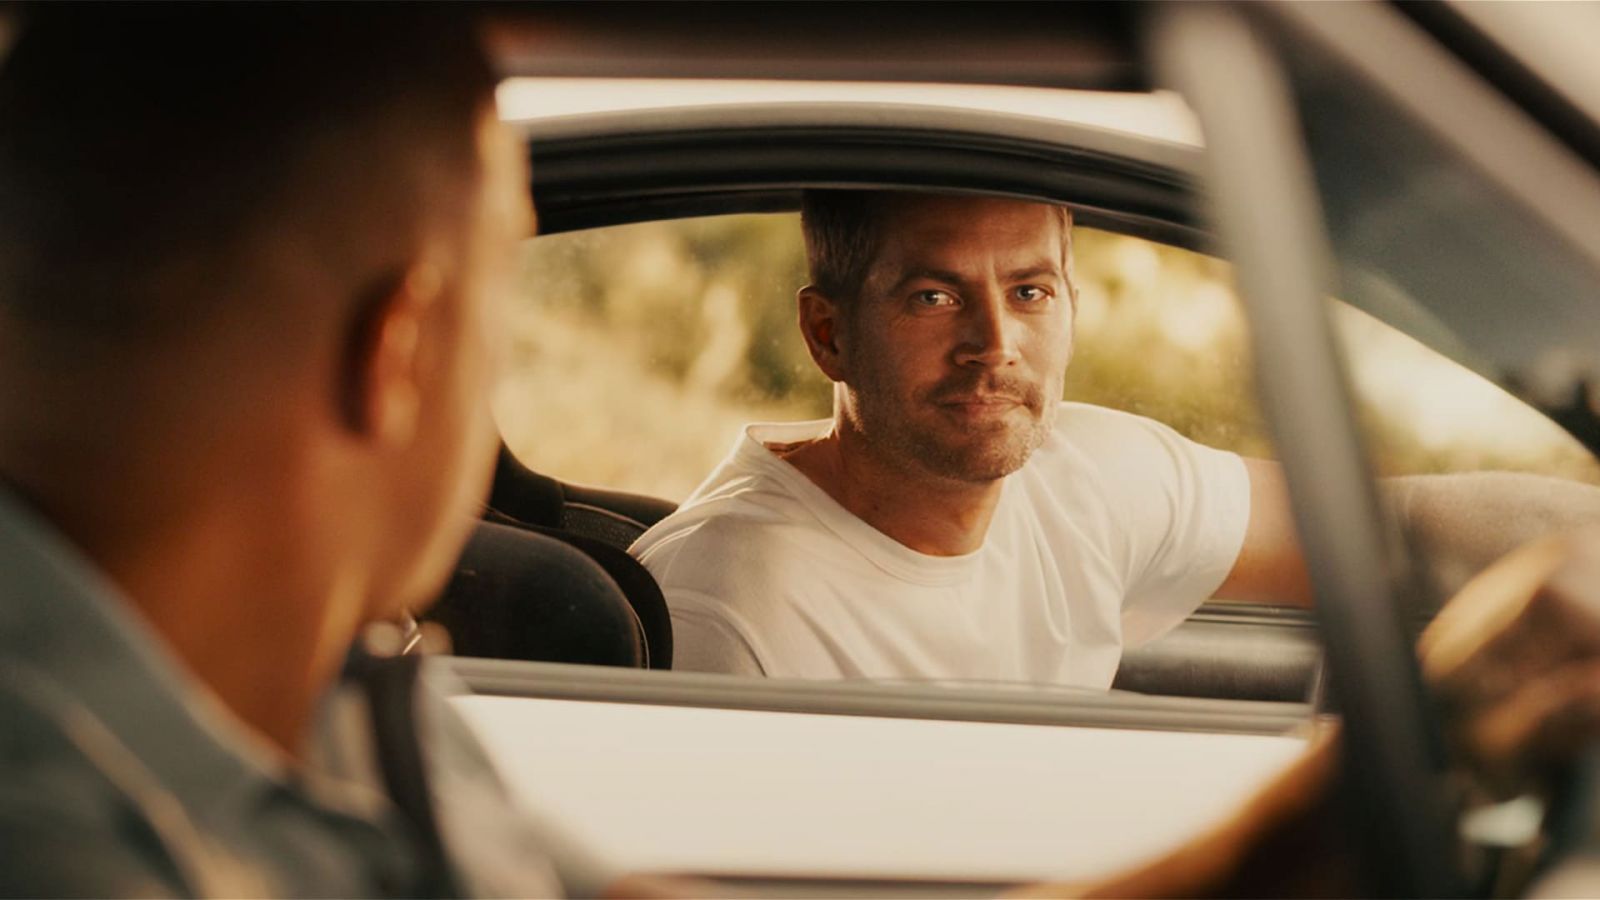 Fast and Furious 7 2015 Full Movies, Fast and Furious 7 2015 Full Film, Fast and Furious 7 2015 Full Movies Watch, Fast and Furious 7 2015 Full Film Watch, Fast and Furious 7 2015 Full Movies Watch Online Free, Fast and Furious 7 2015 Full Film Watch Free Online, Watch Streaming HD Fast and Furious 7 2015 Full Movies, Fast and Furious 7 2015 English Language Full Movies, Fast and Furious 7 2015 English Language Full Film Free Watch Online, Download Fast and Furious 7 2015 Full Movies Full HD 1080P, Streaming Watch Free Movies Fast and Furious 7 2015 Full Version